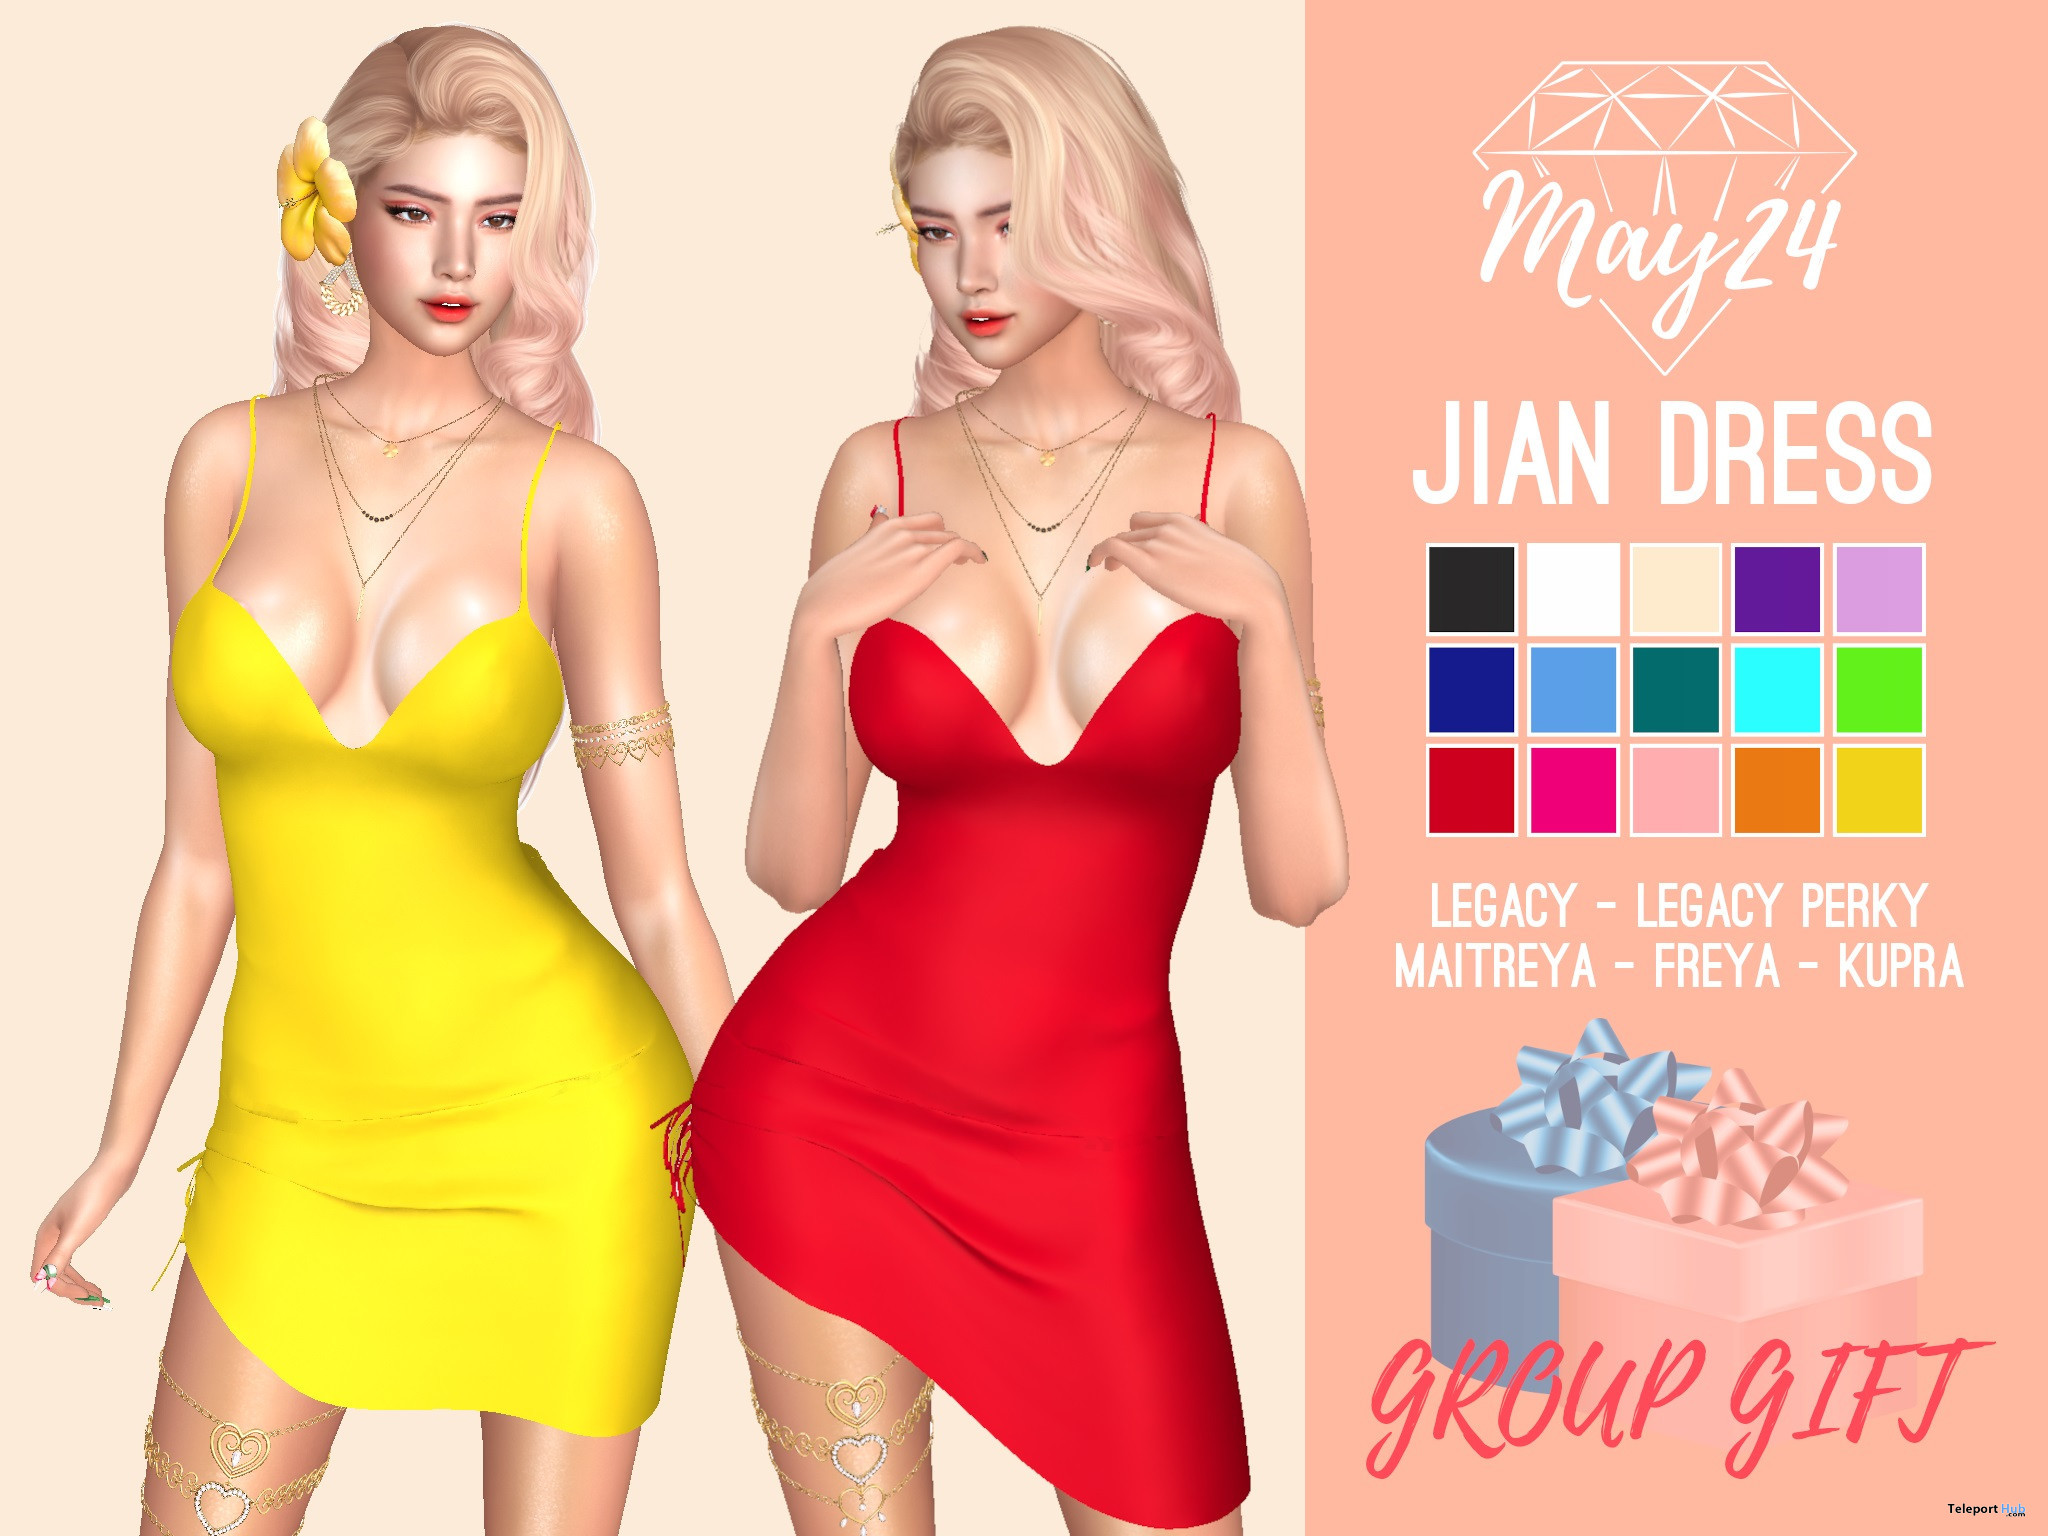 Jian Dress Fatpack June 2022 Group Gift by May24 - Teleport Hub - teleporthub.com